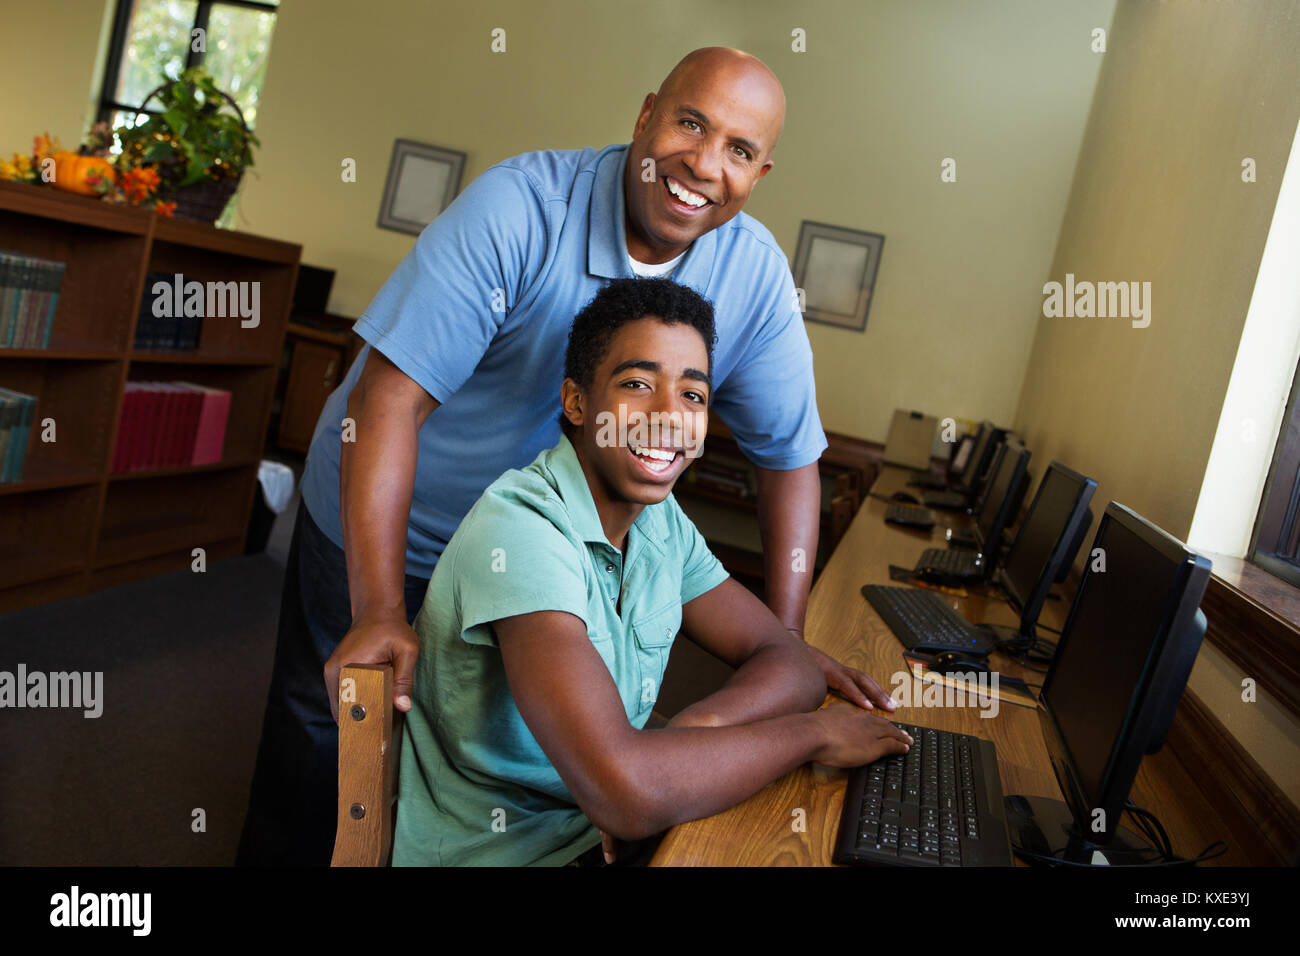 Young man getting tutoring. Stock Photo